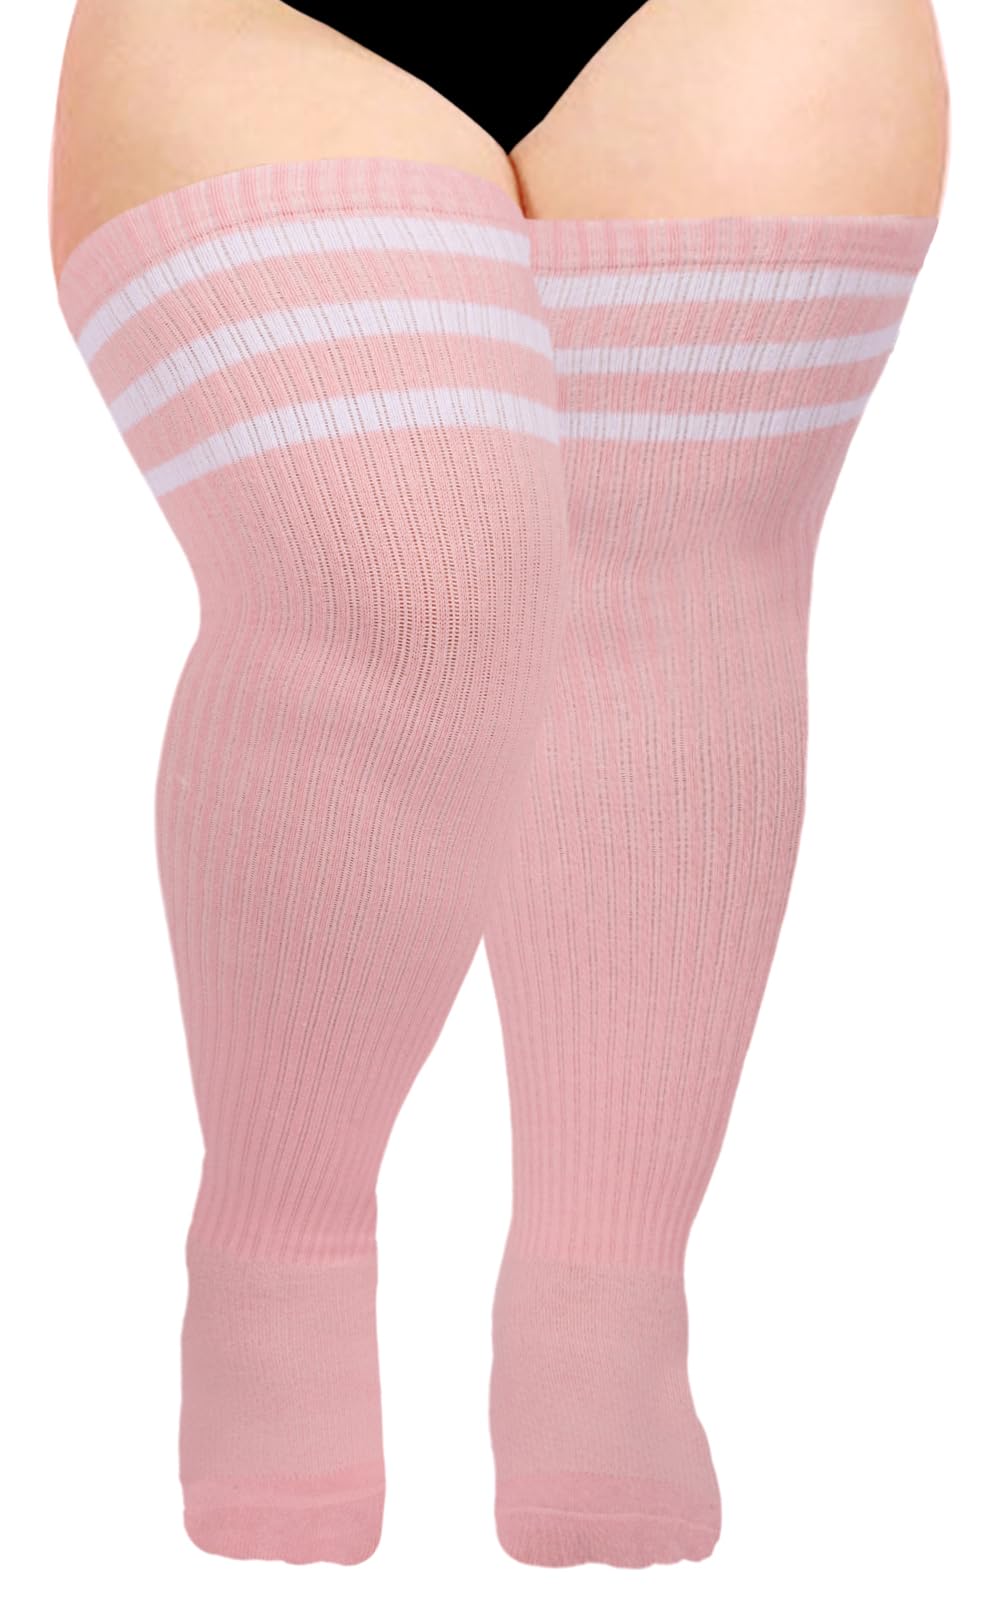 Womens Knit Cotton Extra Long Over the Knee High Socks-Baby Pink & White - Moon Wood